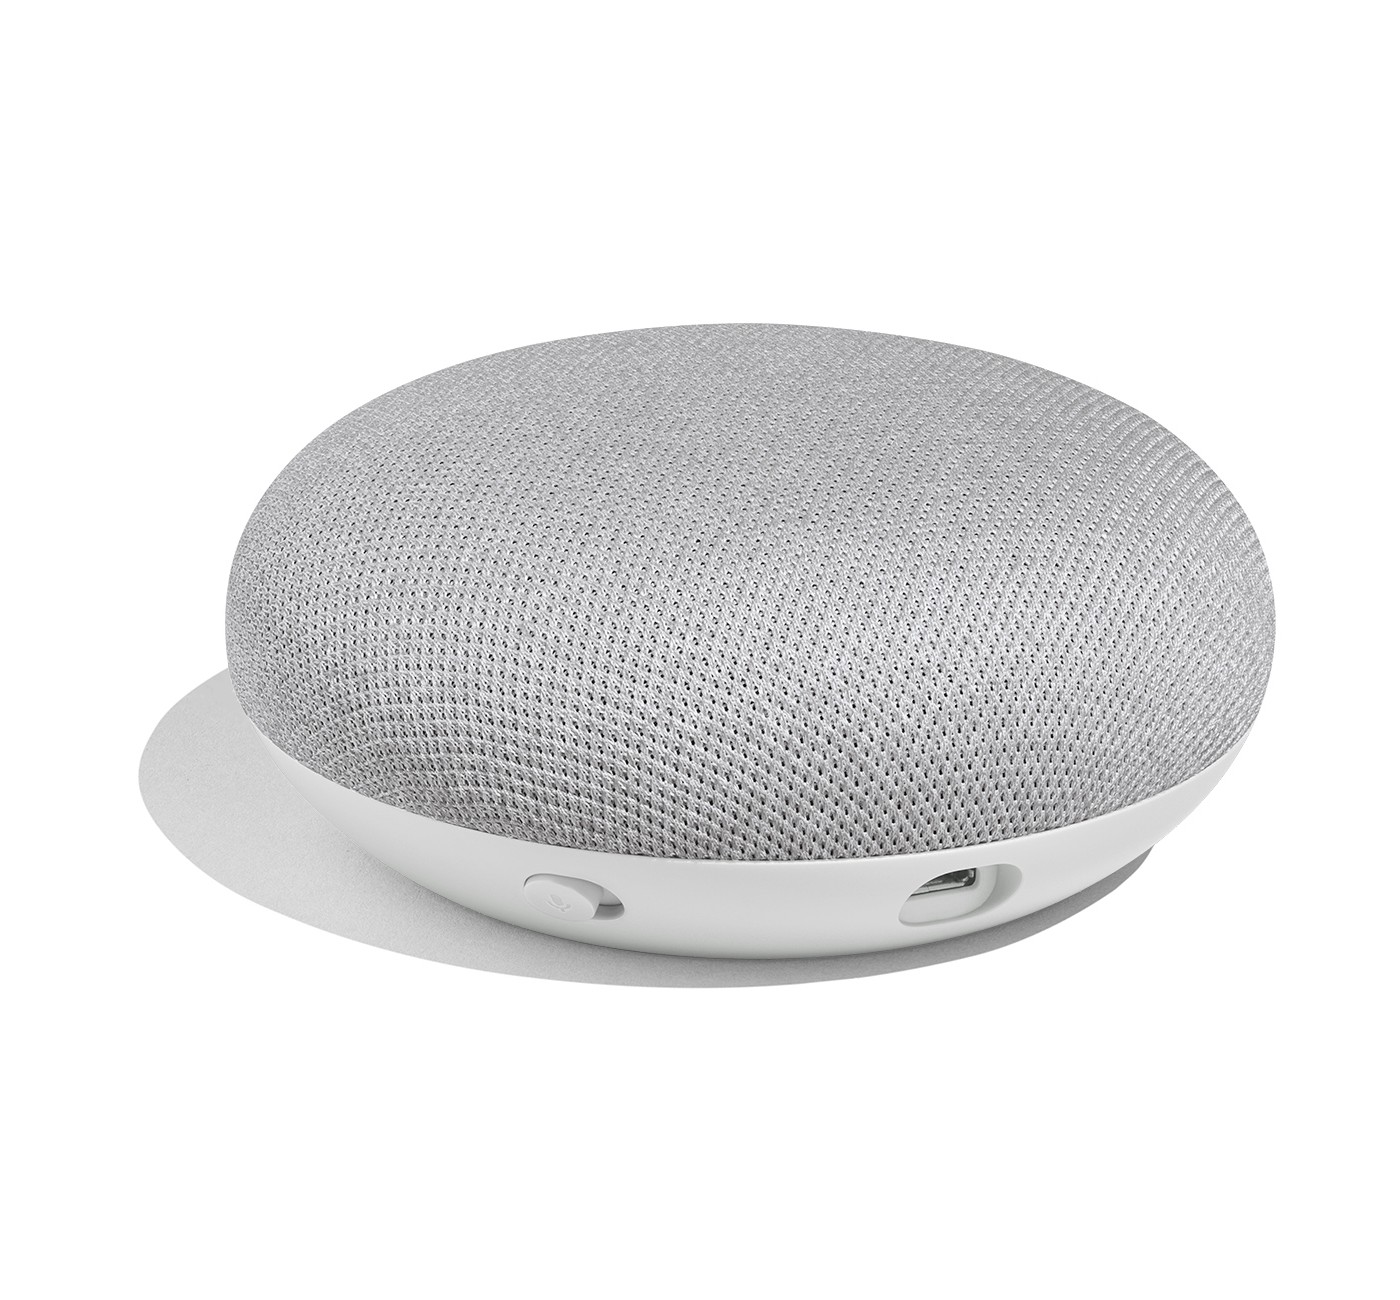 How To Enable Voice Recognition On Google Home Mini